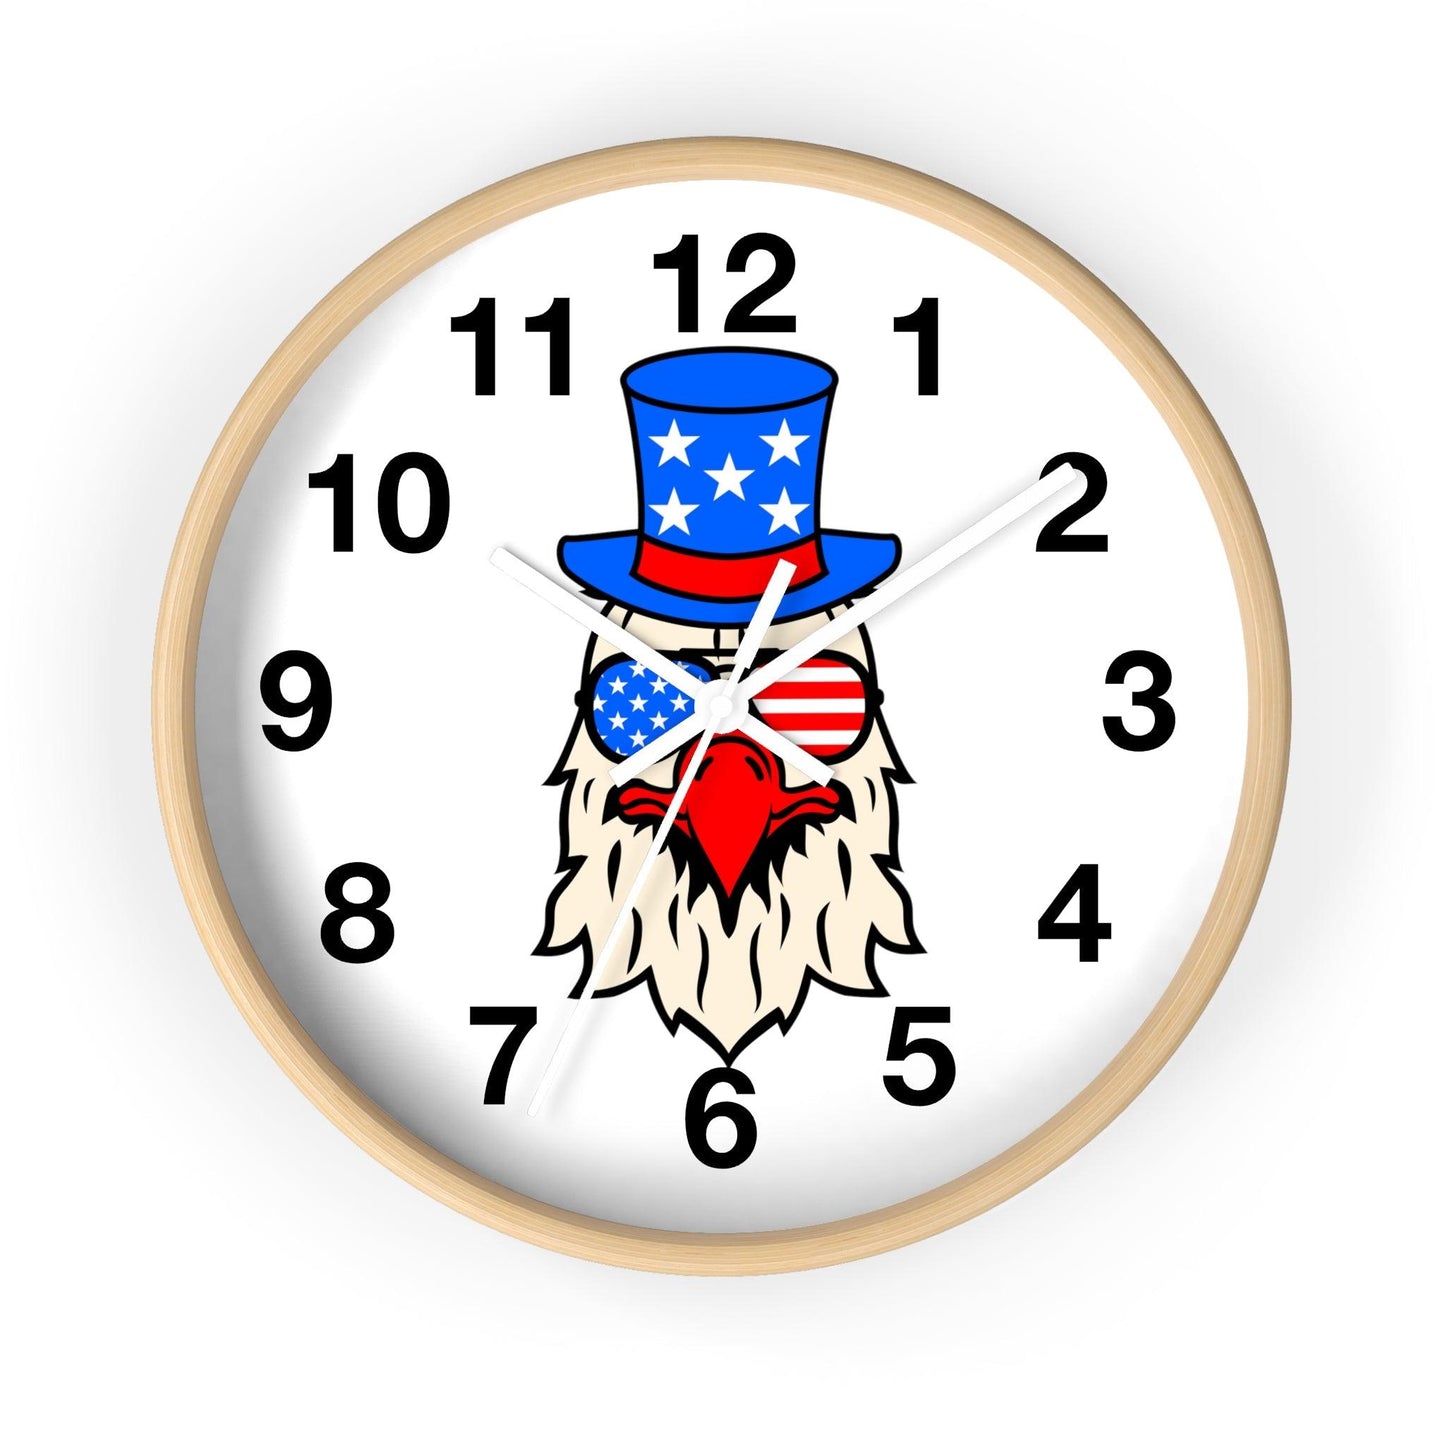 Funny USA Flag Wall Clock, Home decor gift, House Warming gift, New Home Gift, Patriotic gift